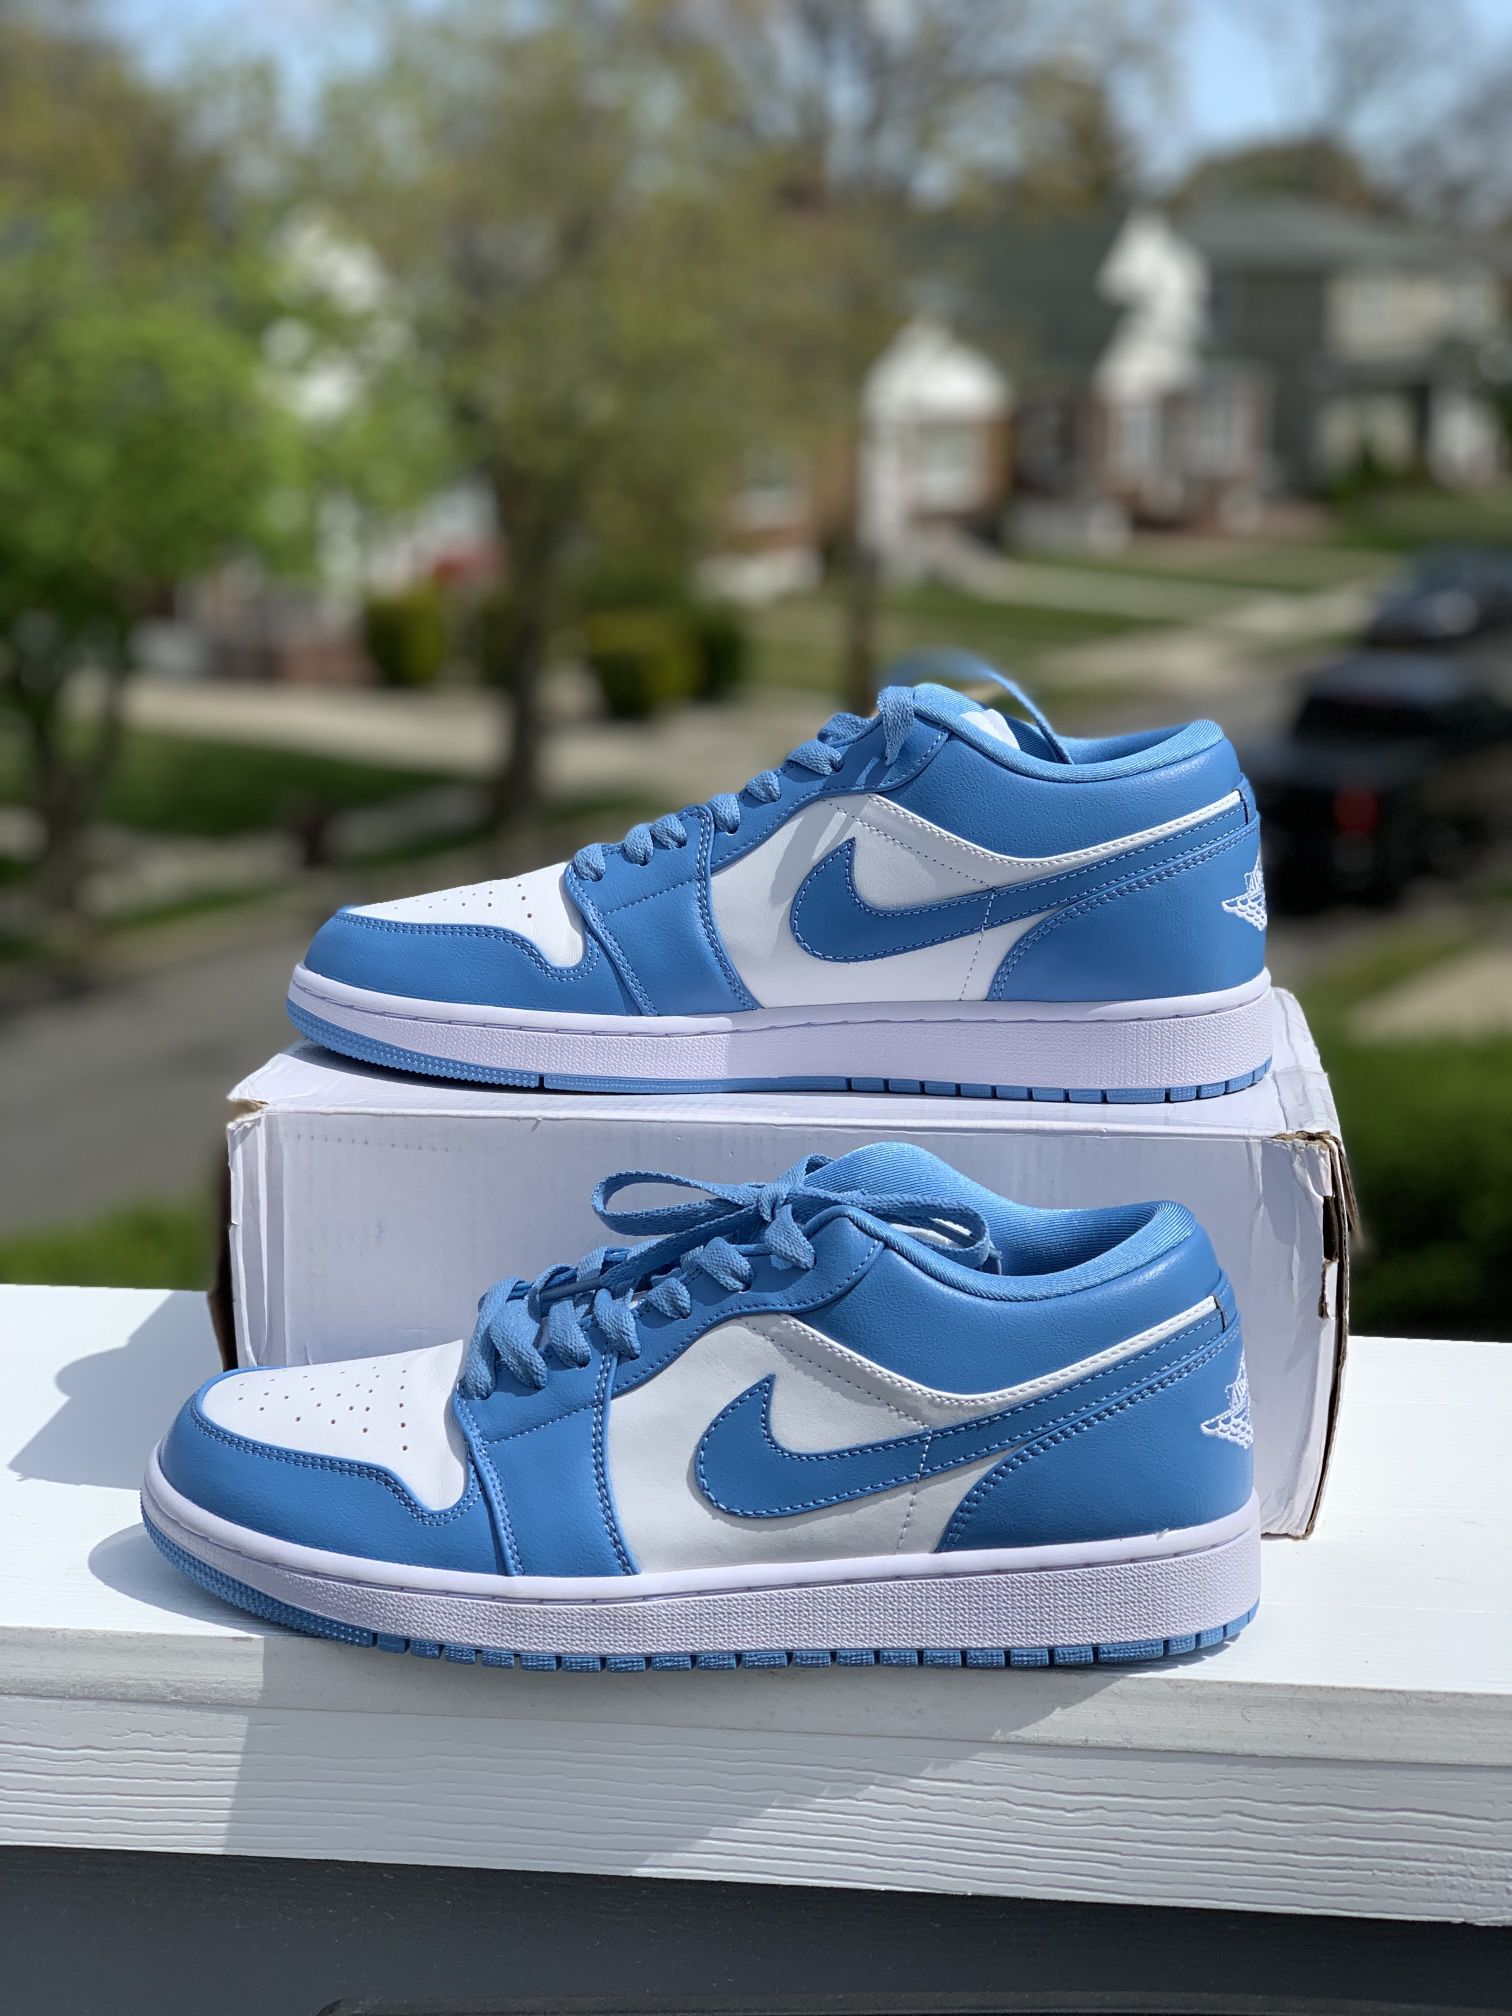 Jordan 1 'UNC'(R3PS) for Sale in Valley Stream, NY - OfferUp